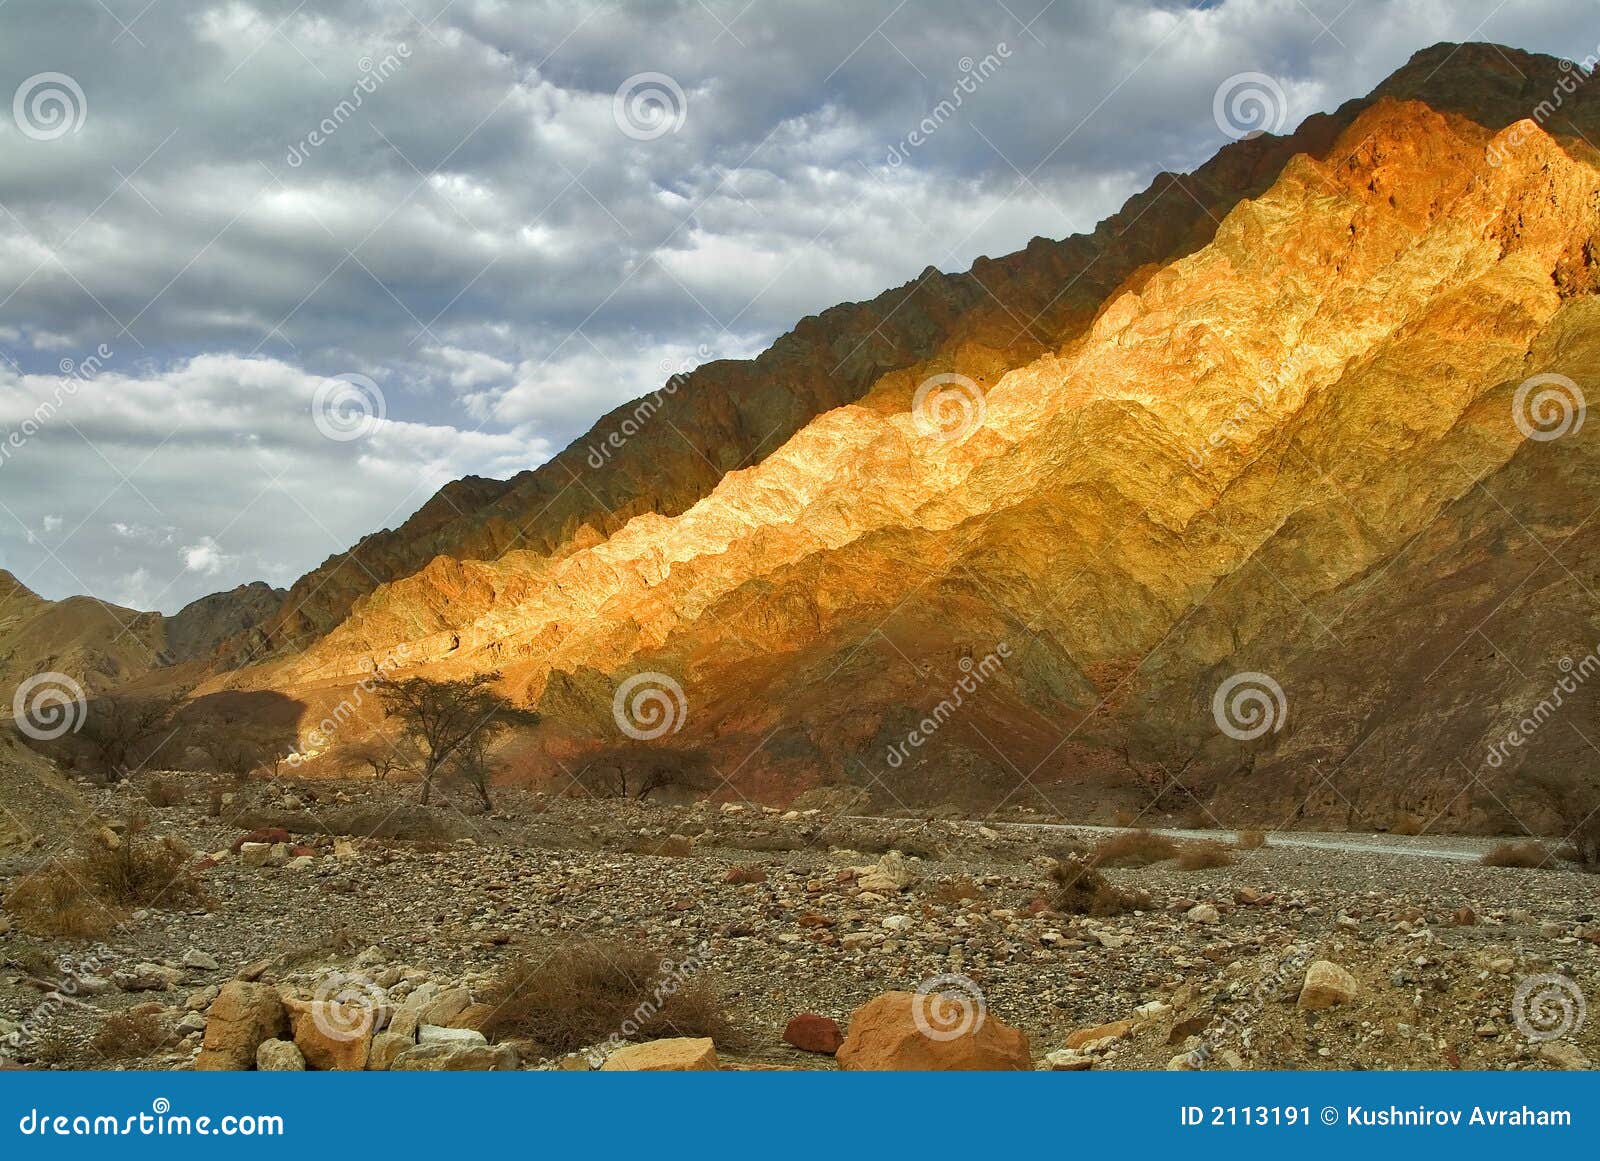 Gold mountain stock image. Image of long, destinations - 2113191